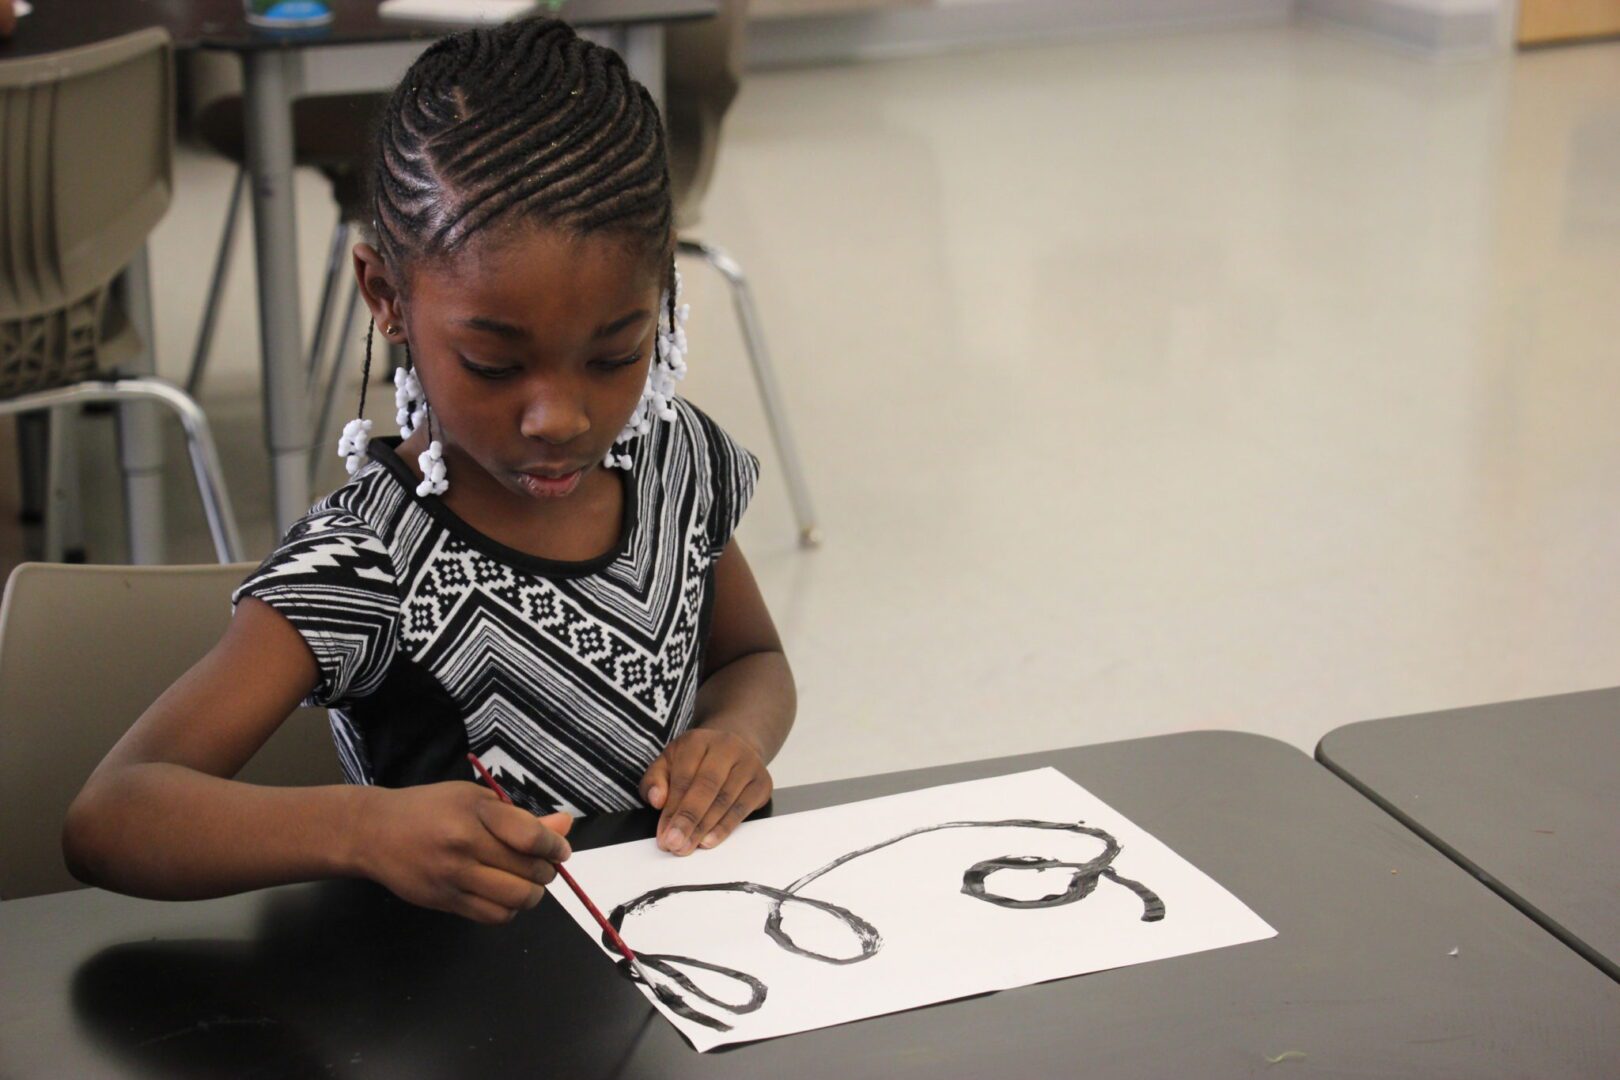 A young girl drawing on a piece of paper.